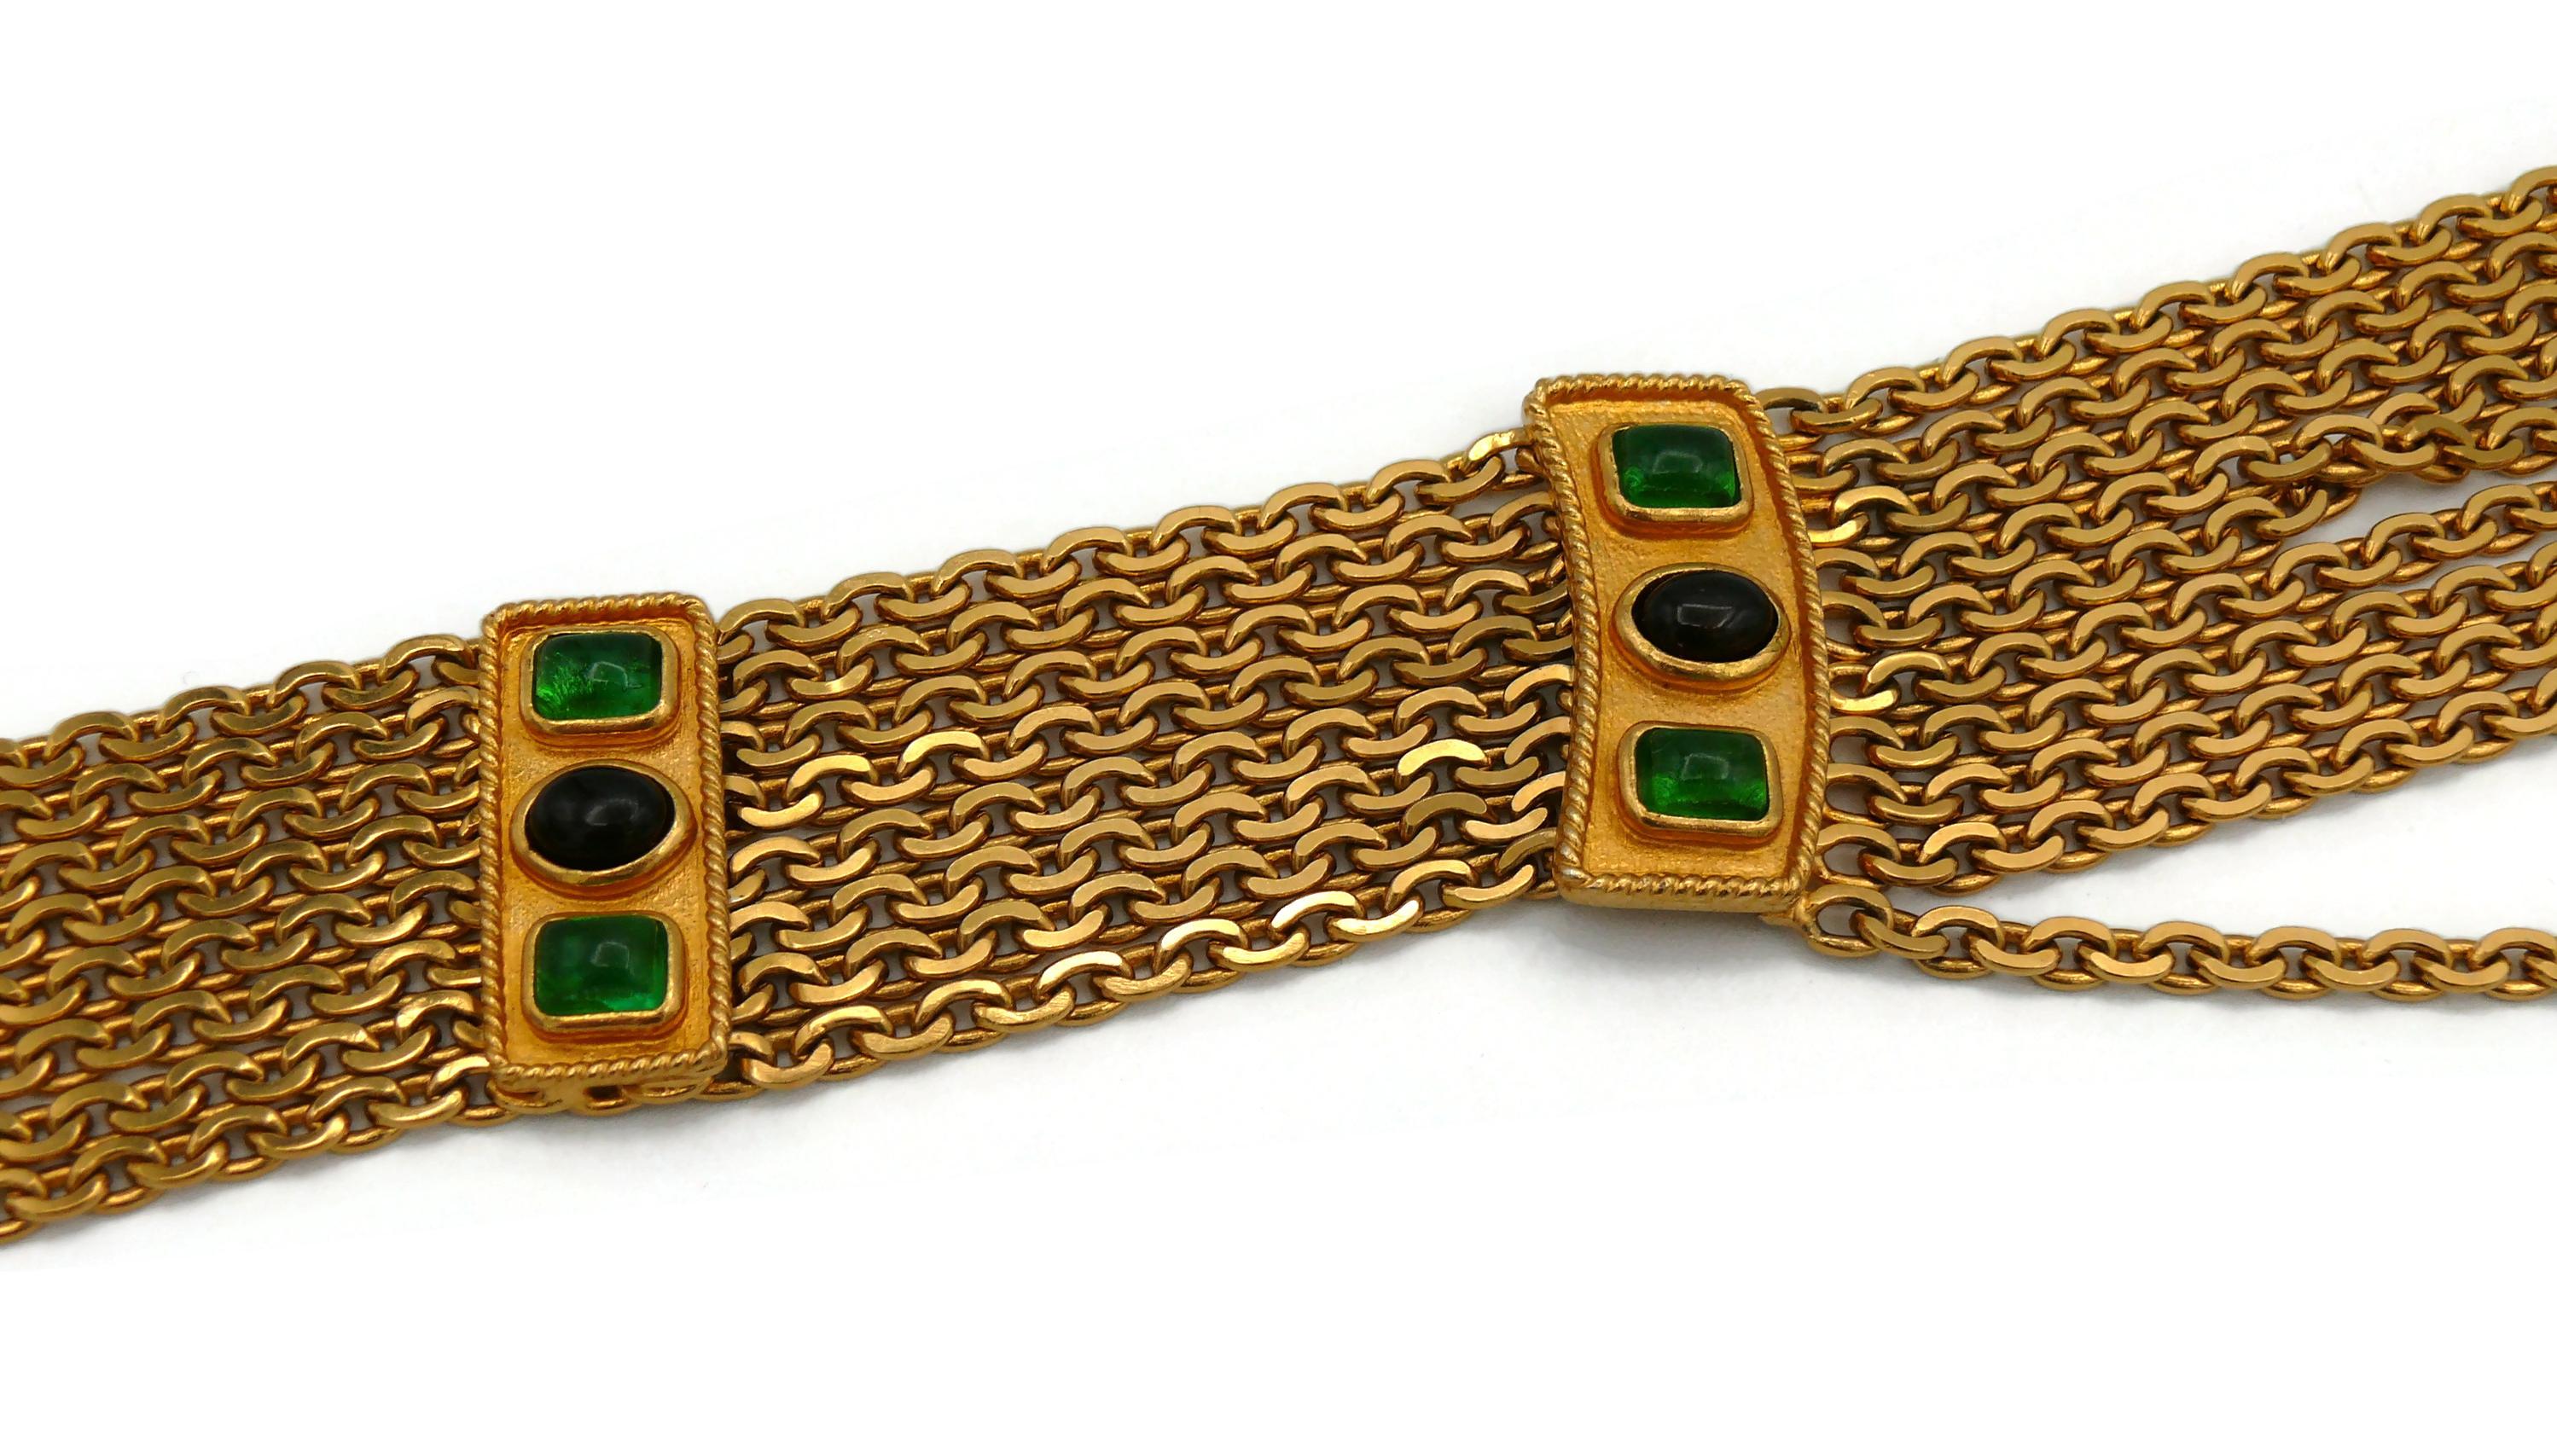 CHANEL by KARL LAGERFELD Vintage Gripoix Multi Chain Belt Necklace, 1991 For Sale 6